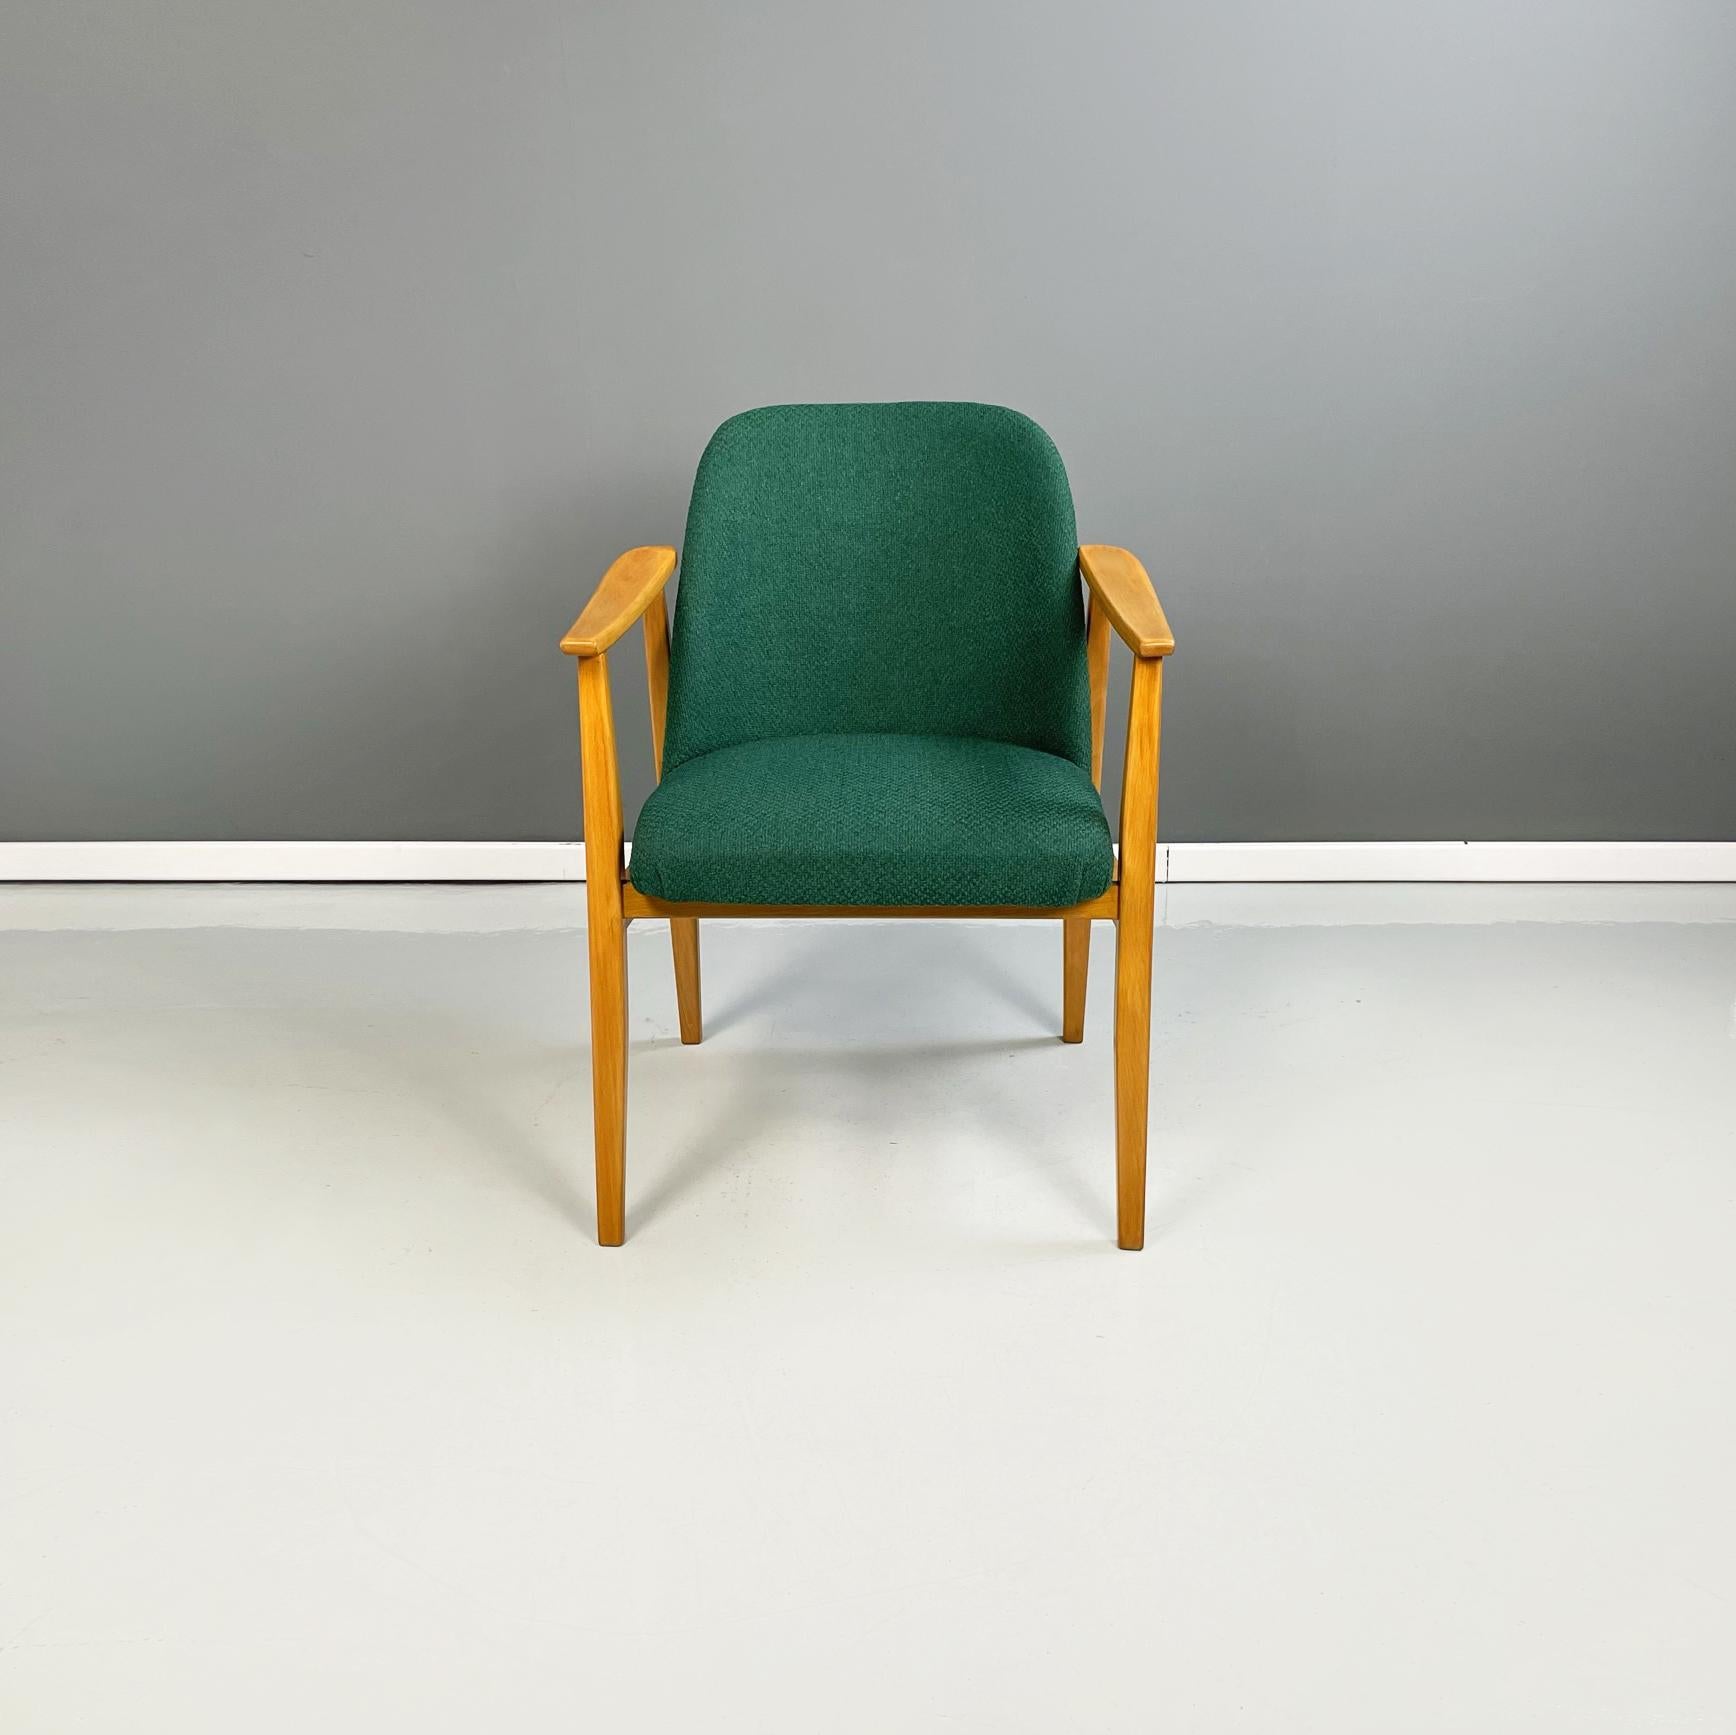 Mid-20th Century Danish Mid-Century Modern Armchairs in Forest Green Fabric and Wood, 1960s For Sale